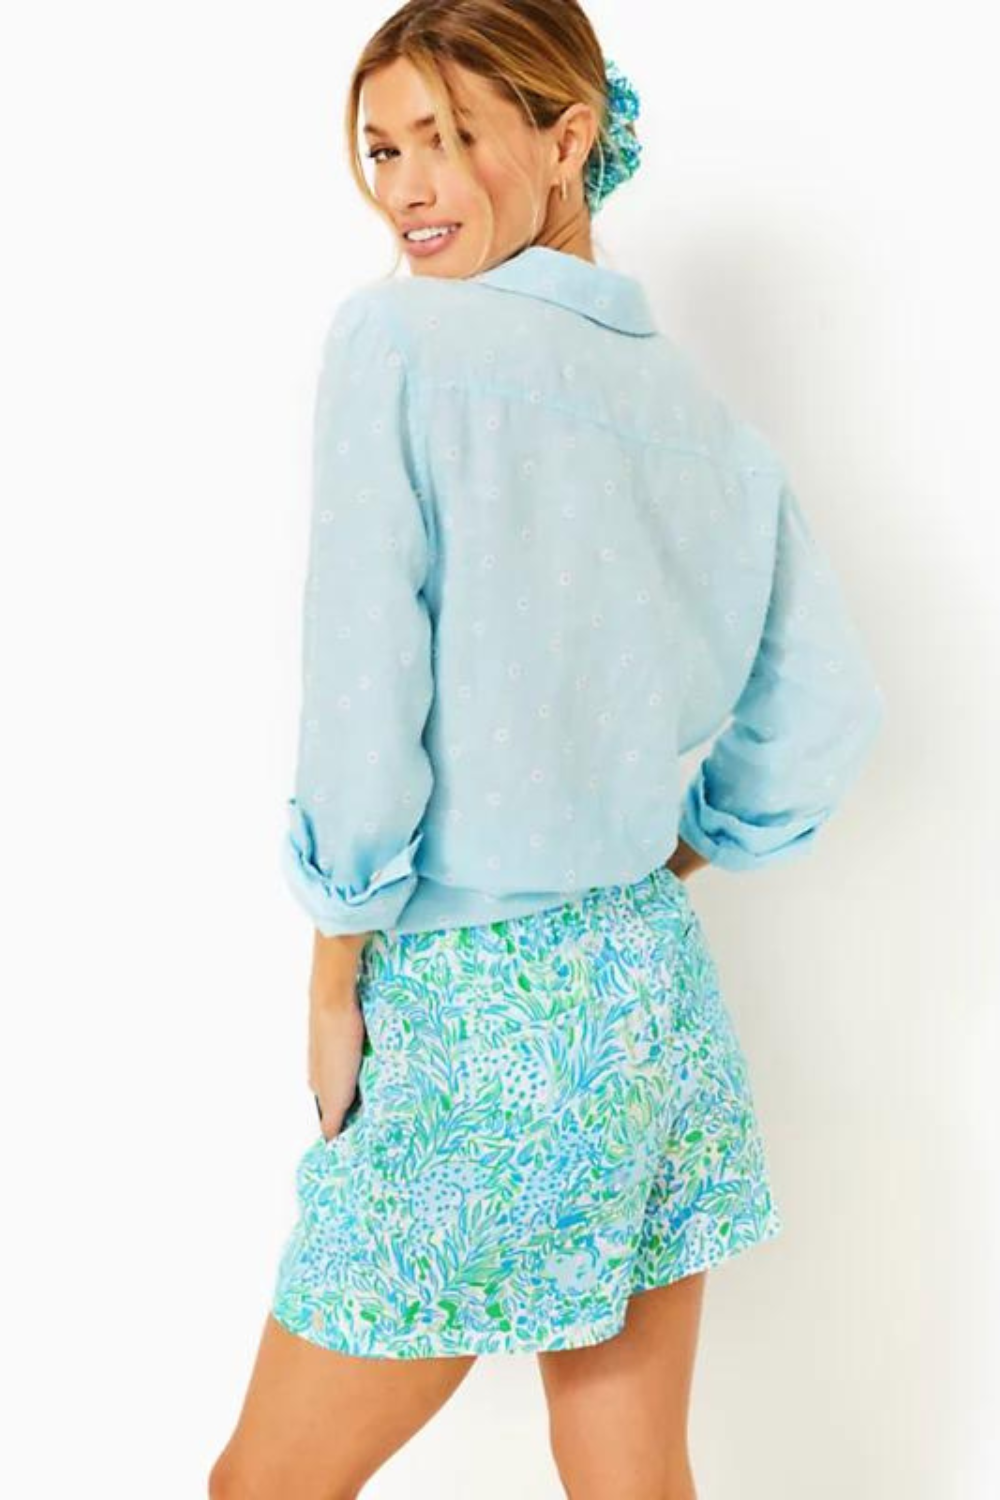 Lilly Pulitzer Lilo Linen Shorts - Dandy Lions